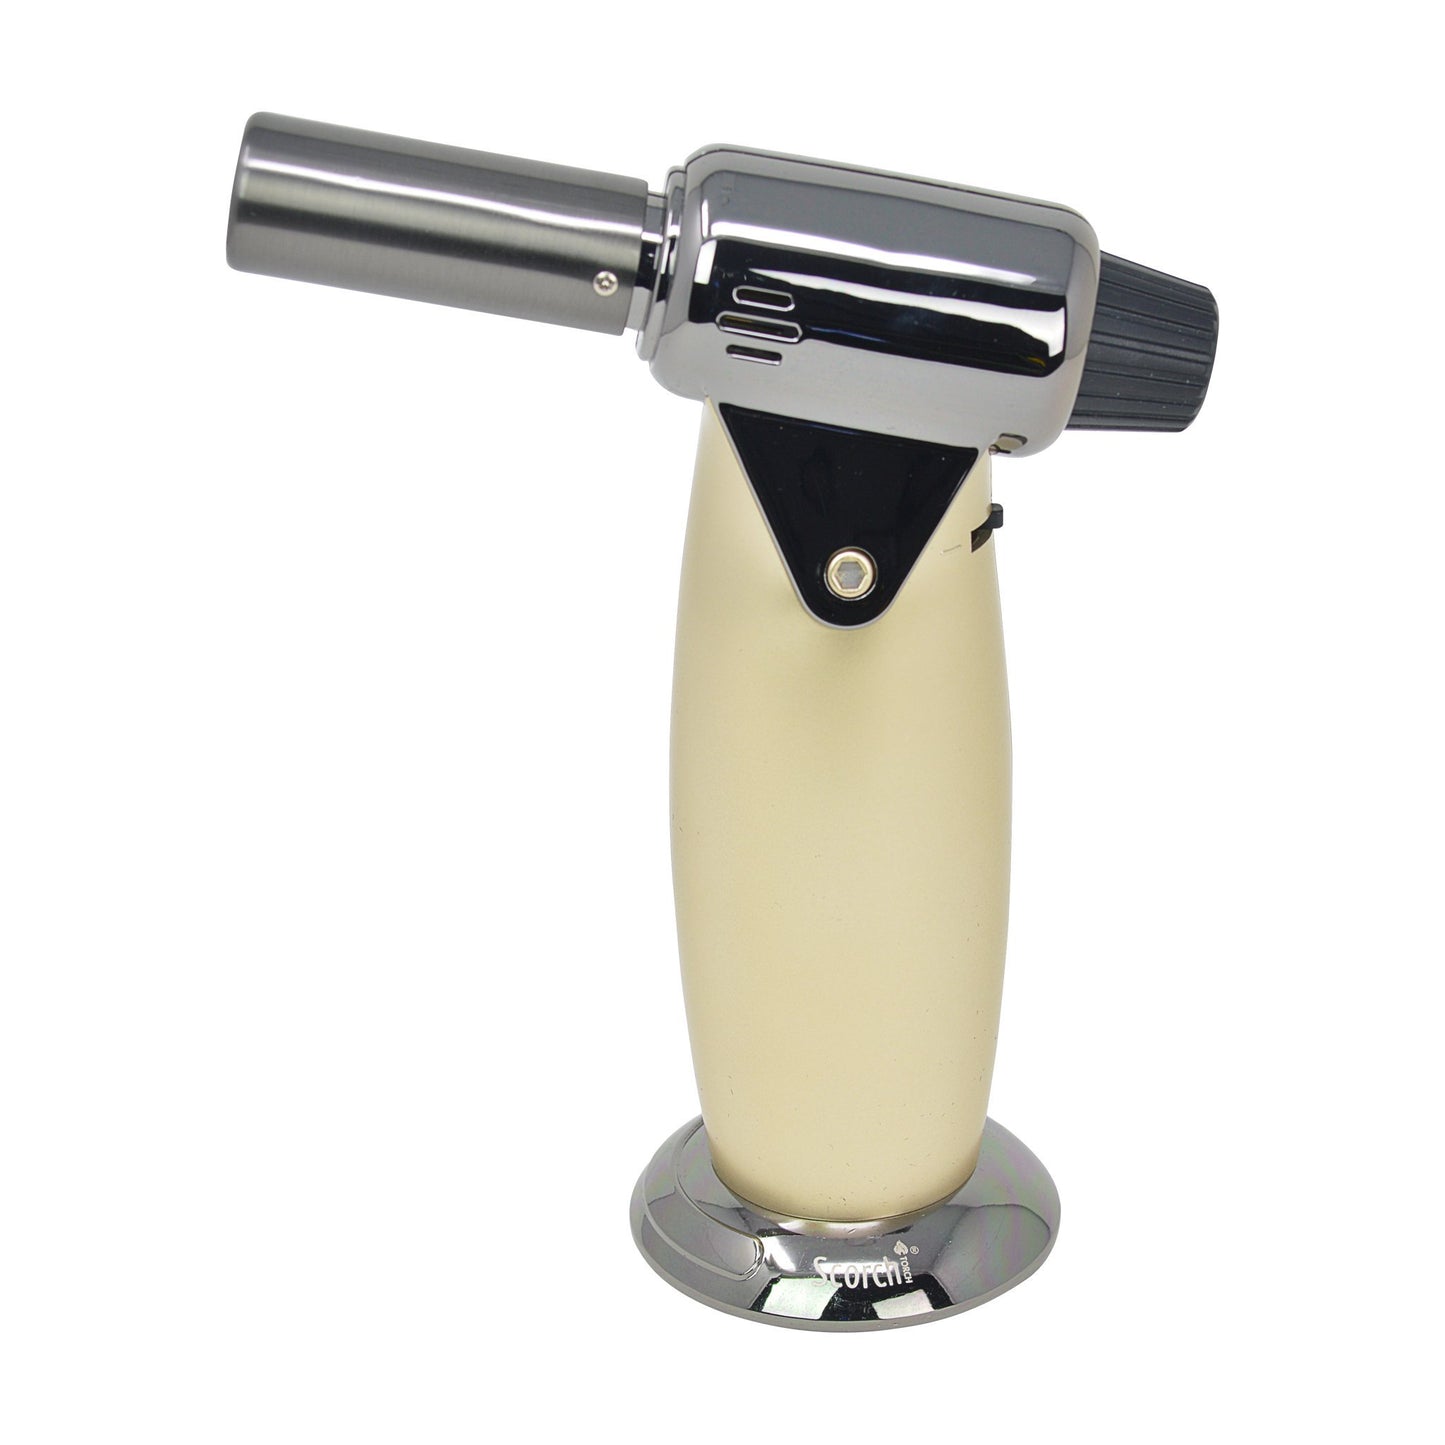 6-inch easy-to-grip handheld torch smoking accessory dial on back adjustable flame gun-shape gold sci fi style